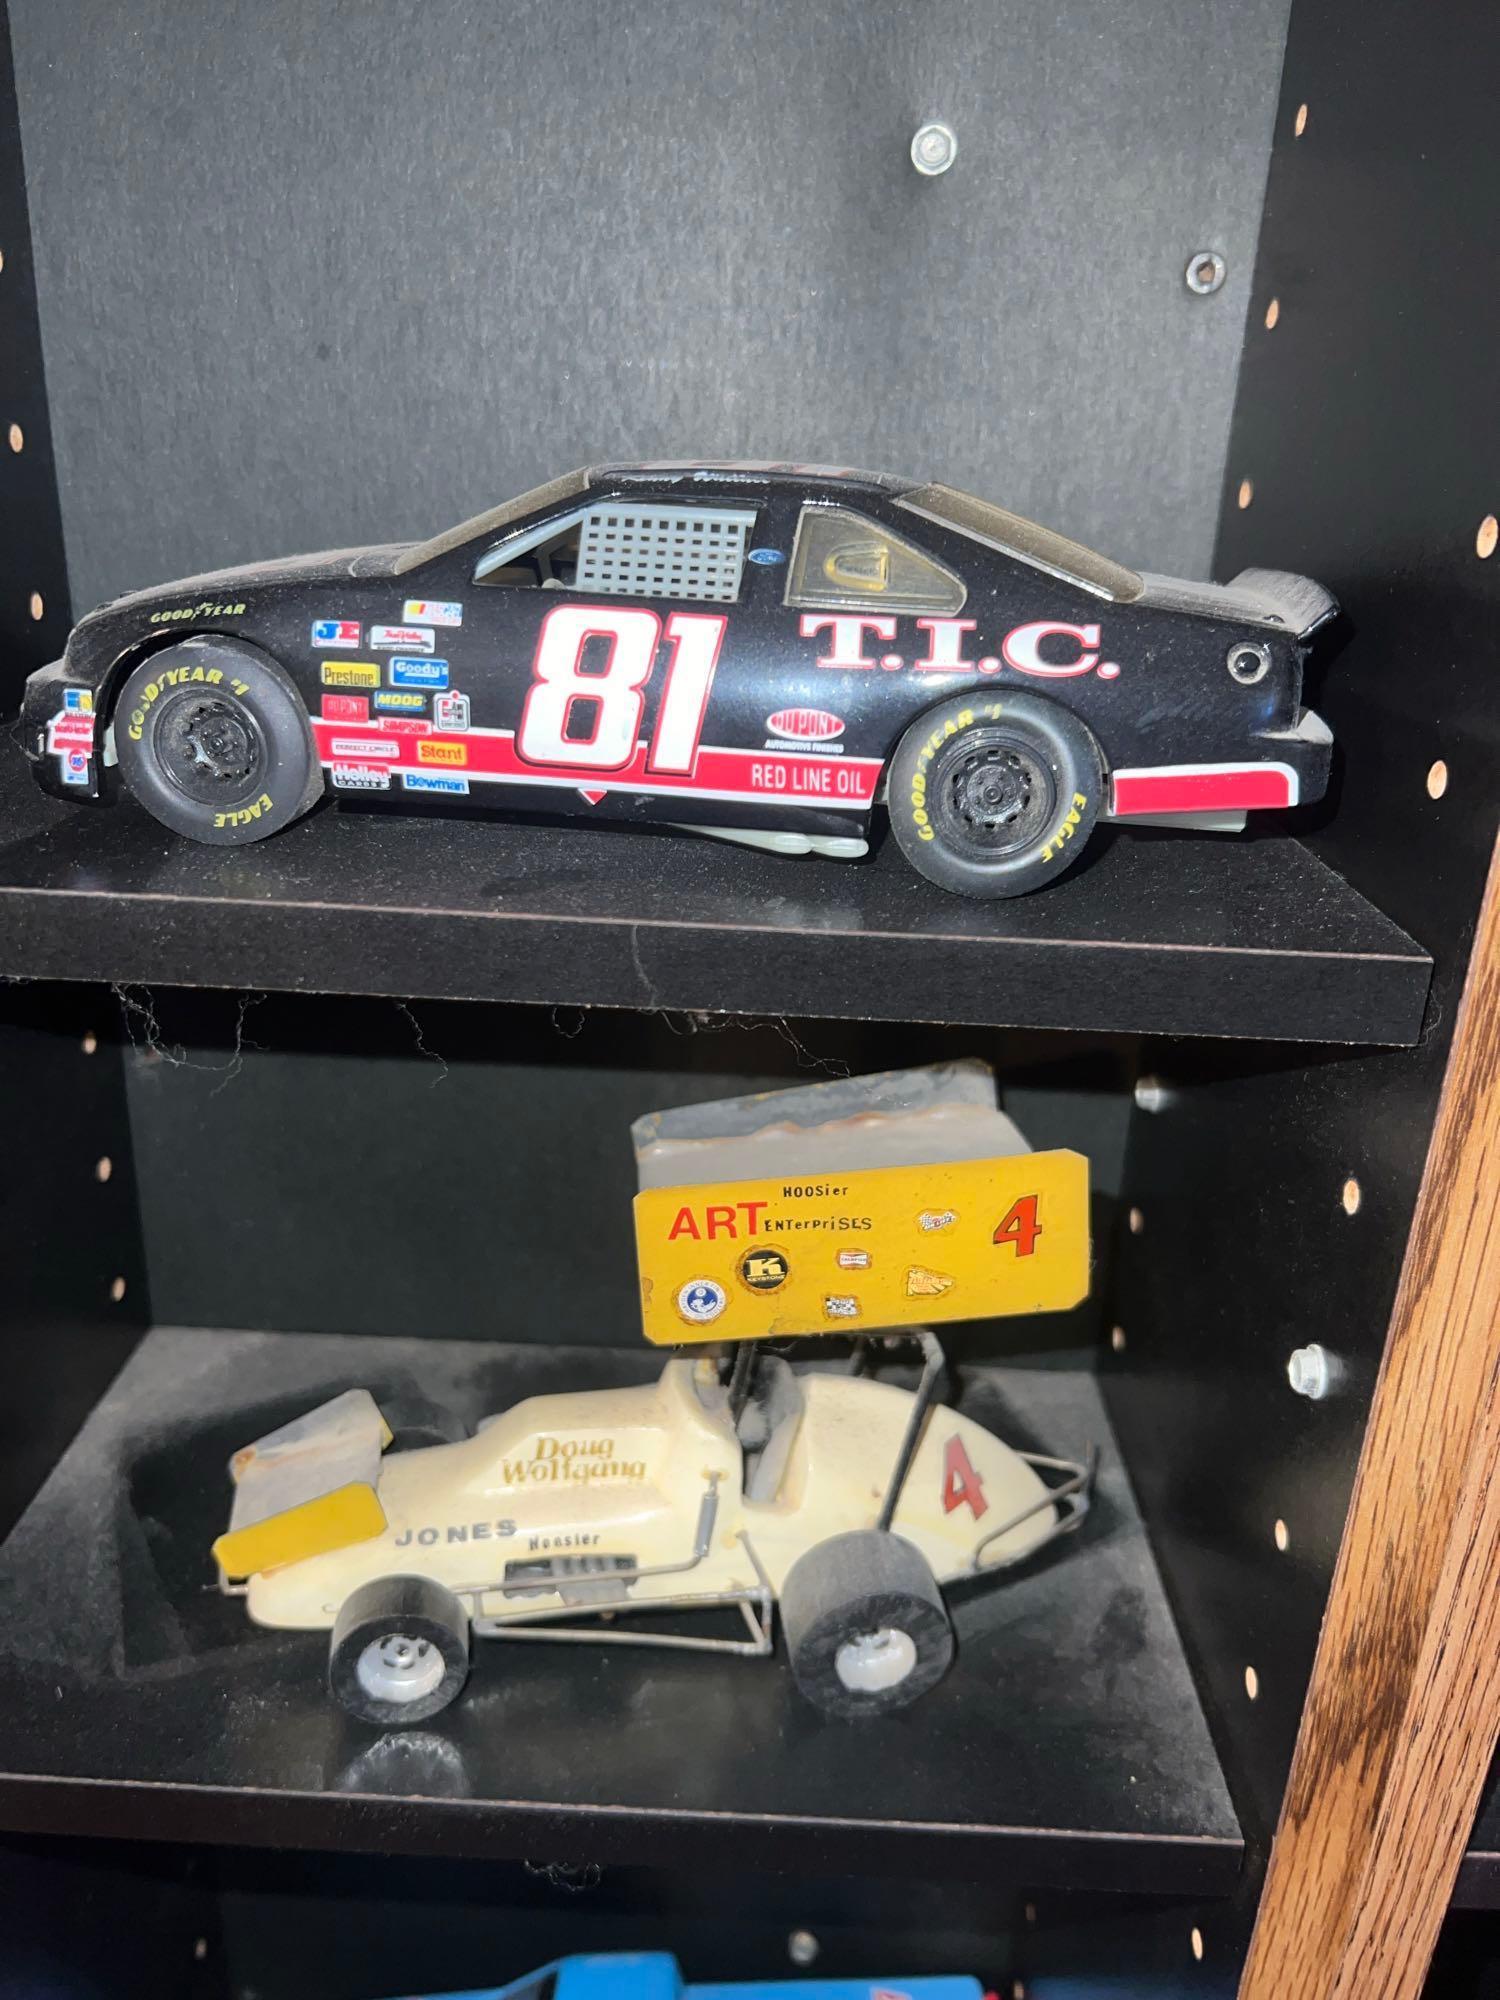 Shelf with collectors cars and motorcycles